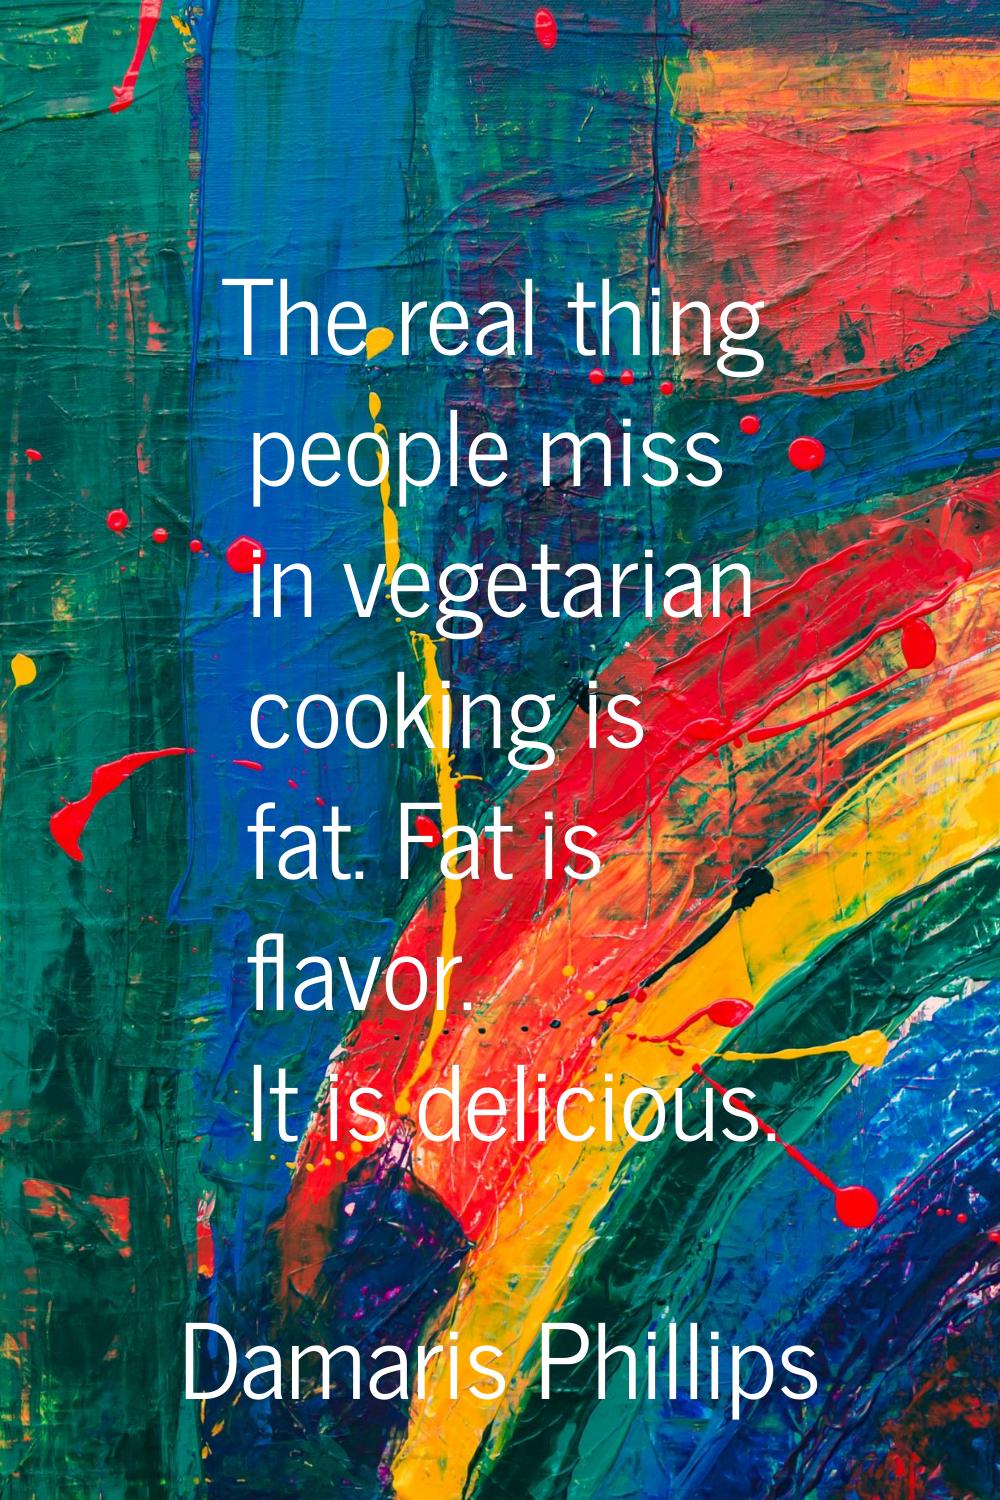 The real thing people miss in vegetarian cooking is fat. Fat is flavor. It is delicious.